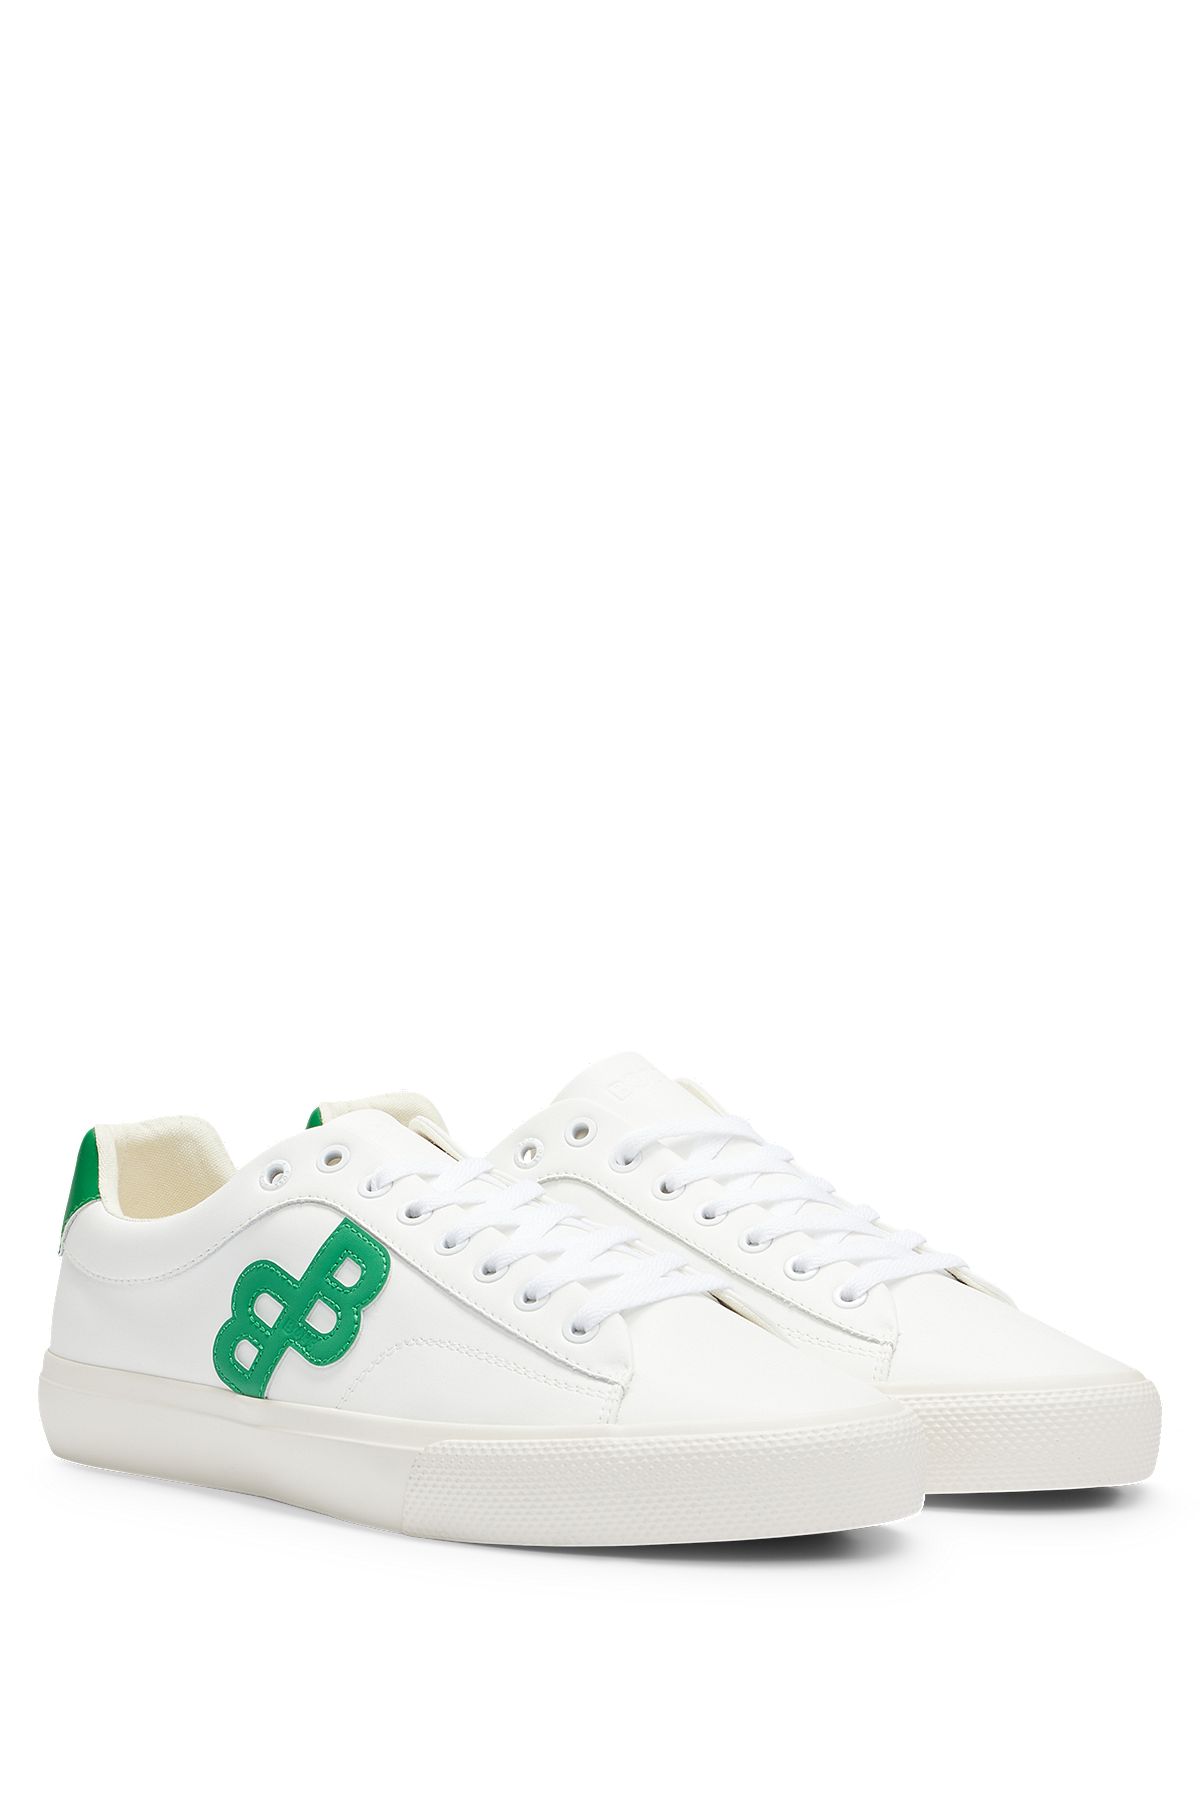 Shop GUCCI Ace Monogram Street Style Logo Sneakers by selectM